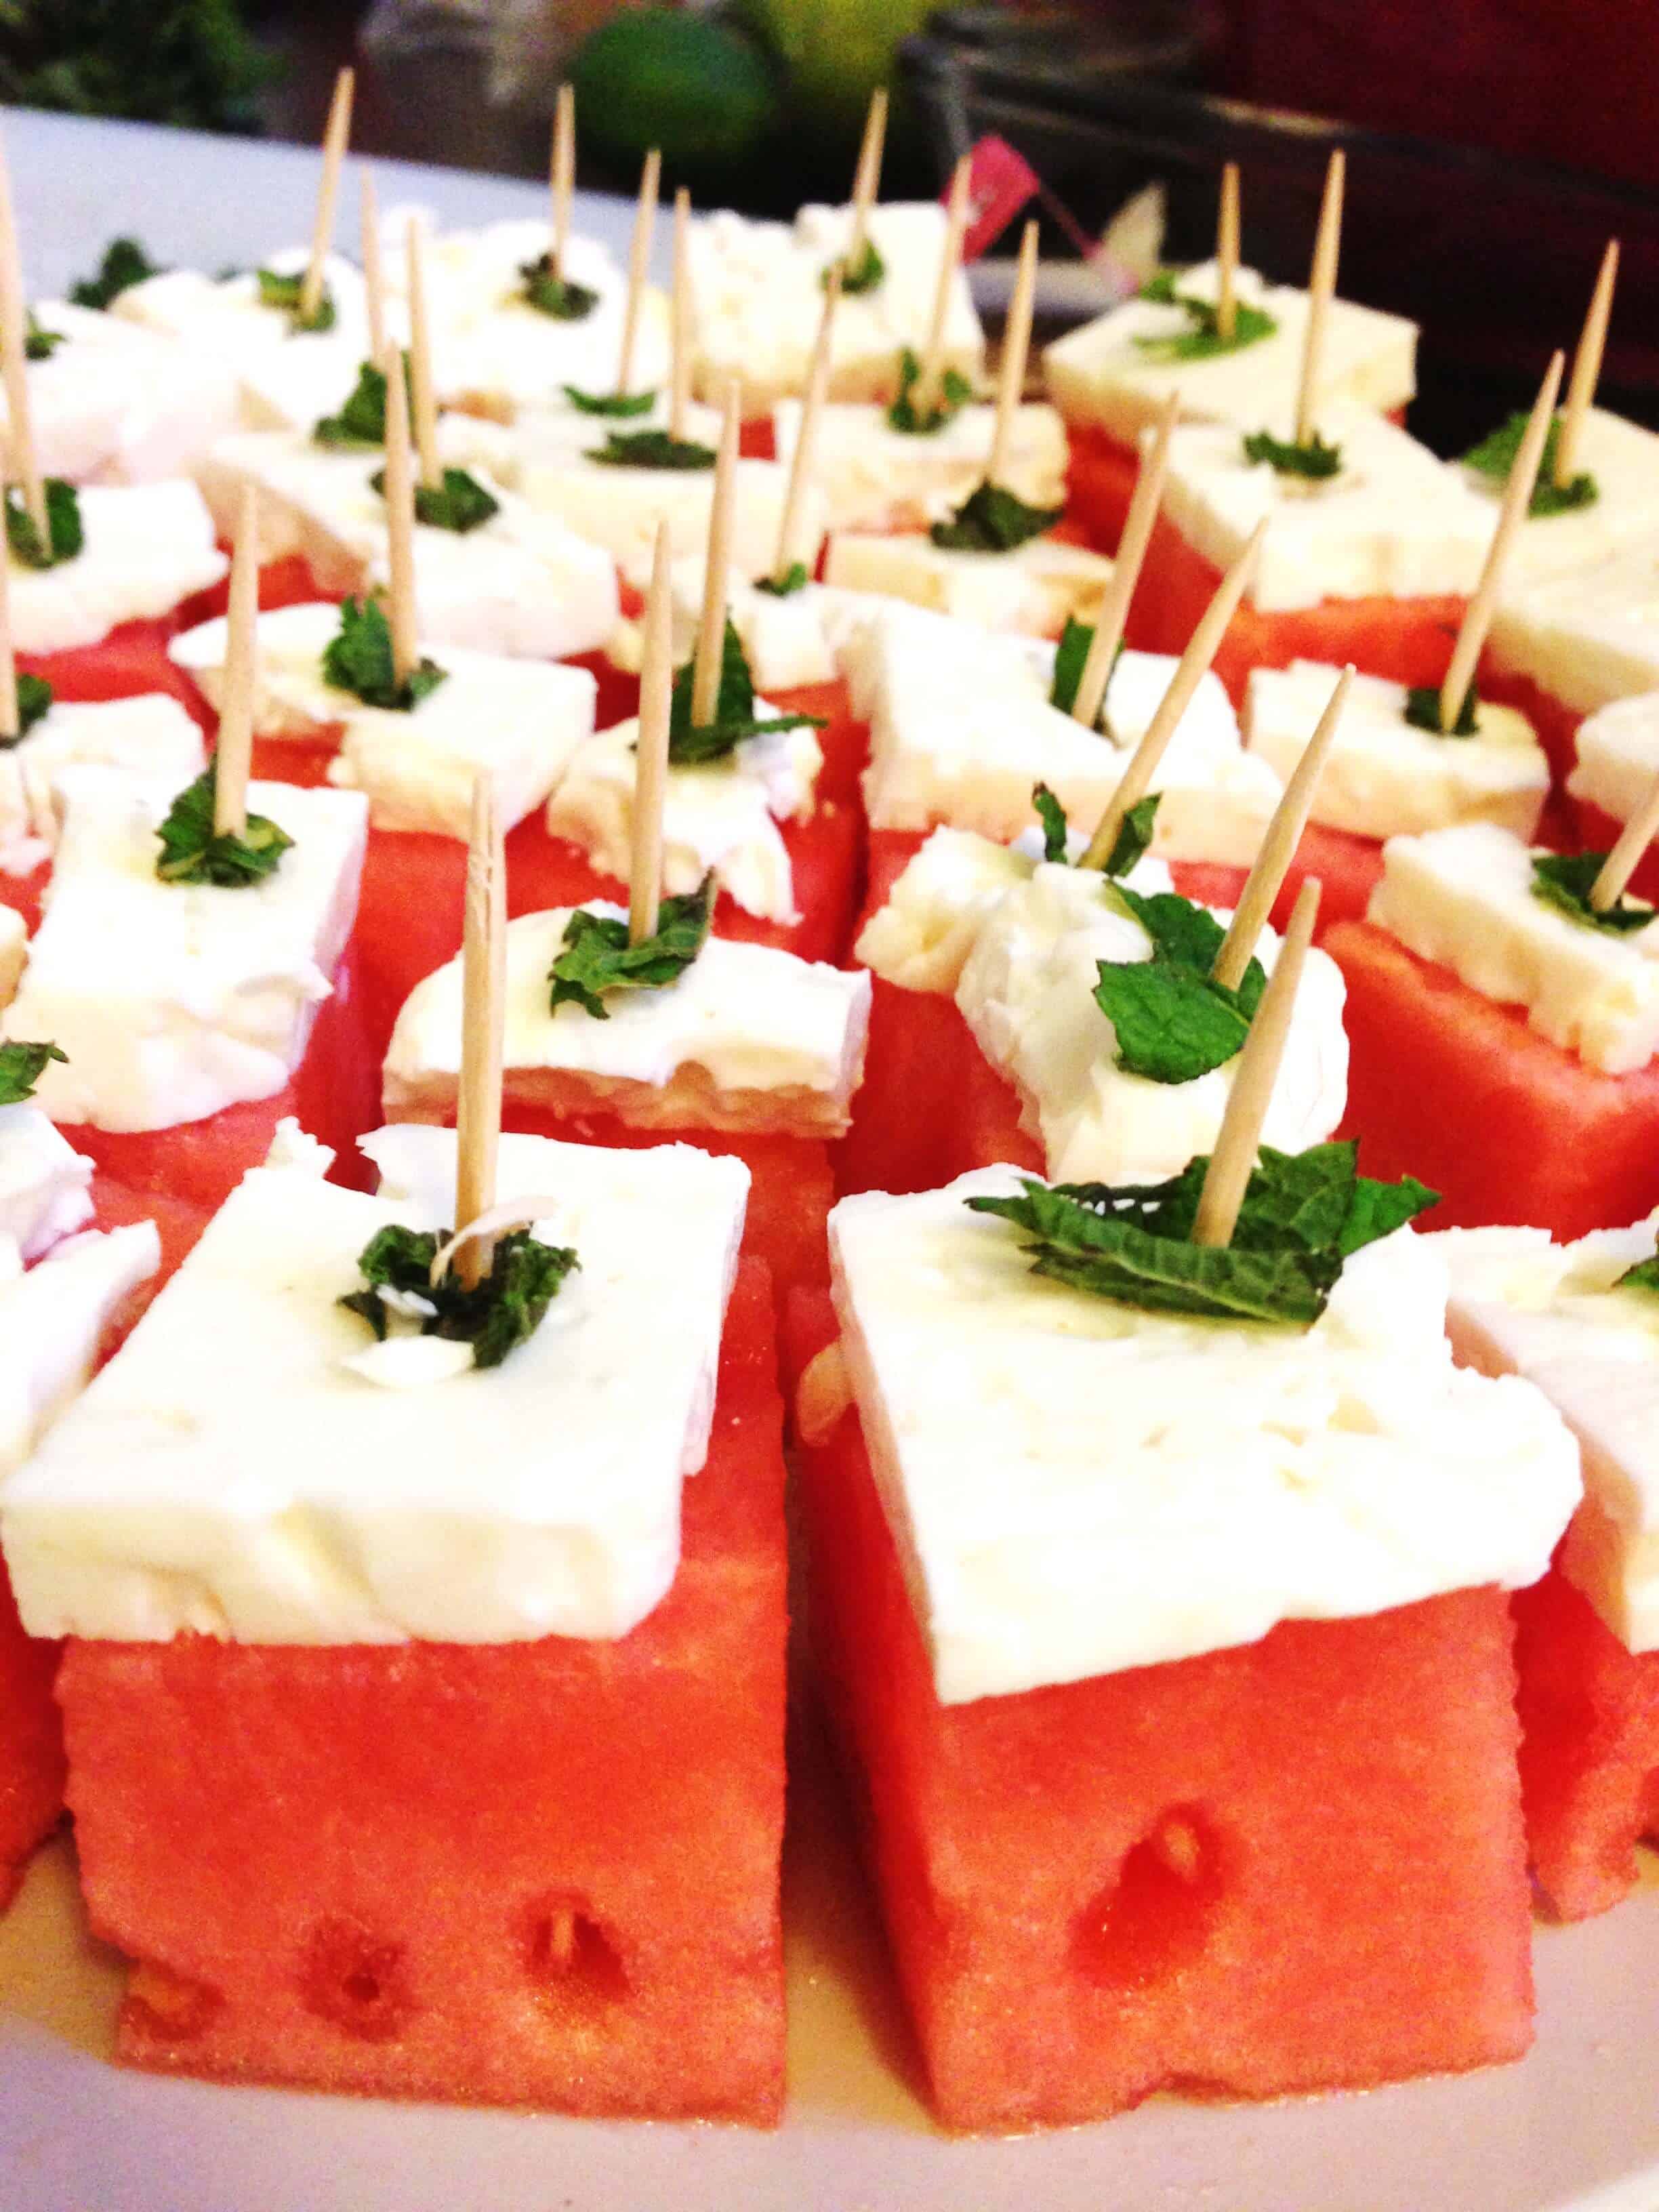 Image of watermelon feta bites garnished with a bit of fresh mint